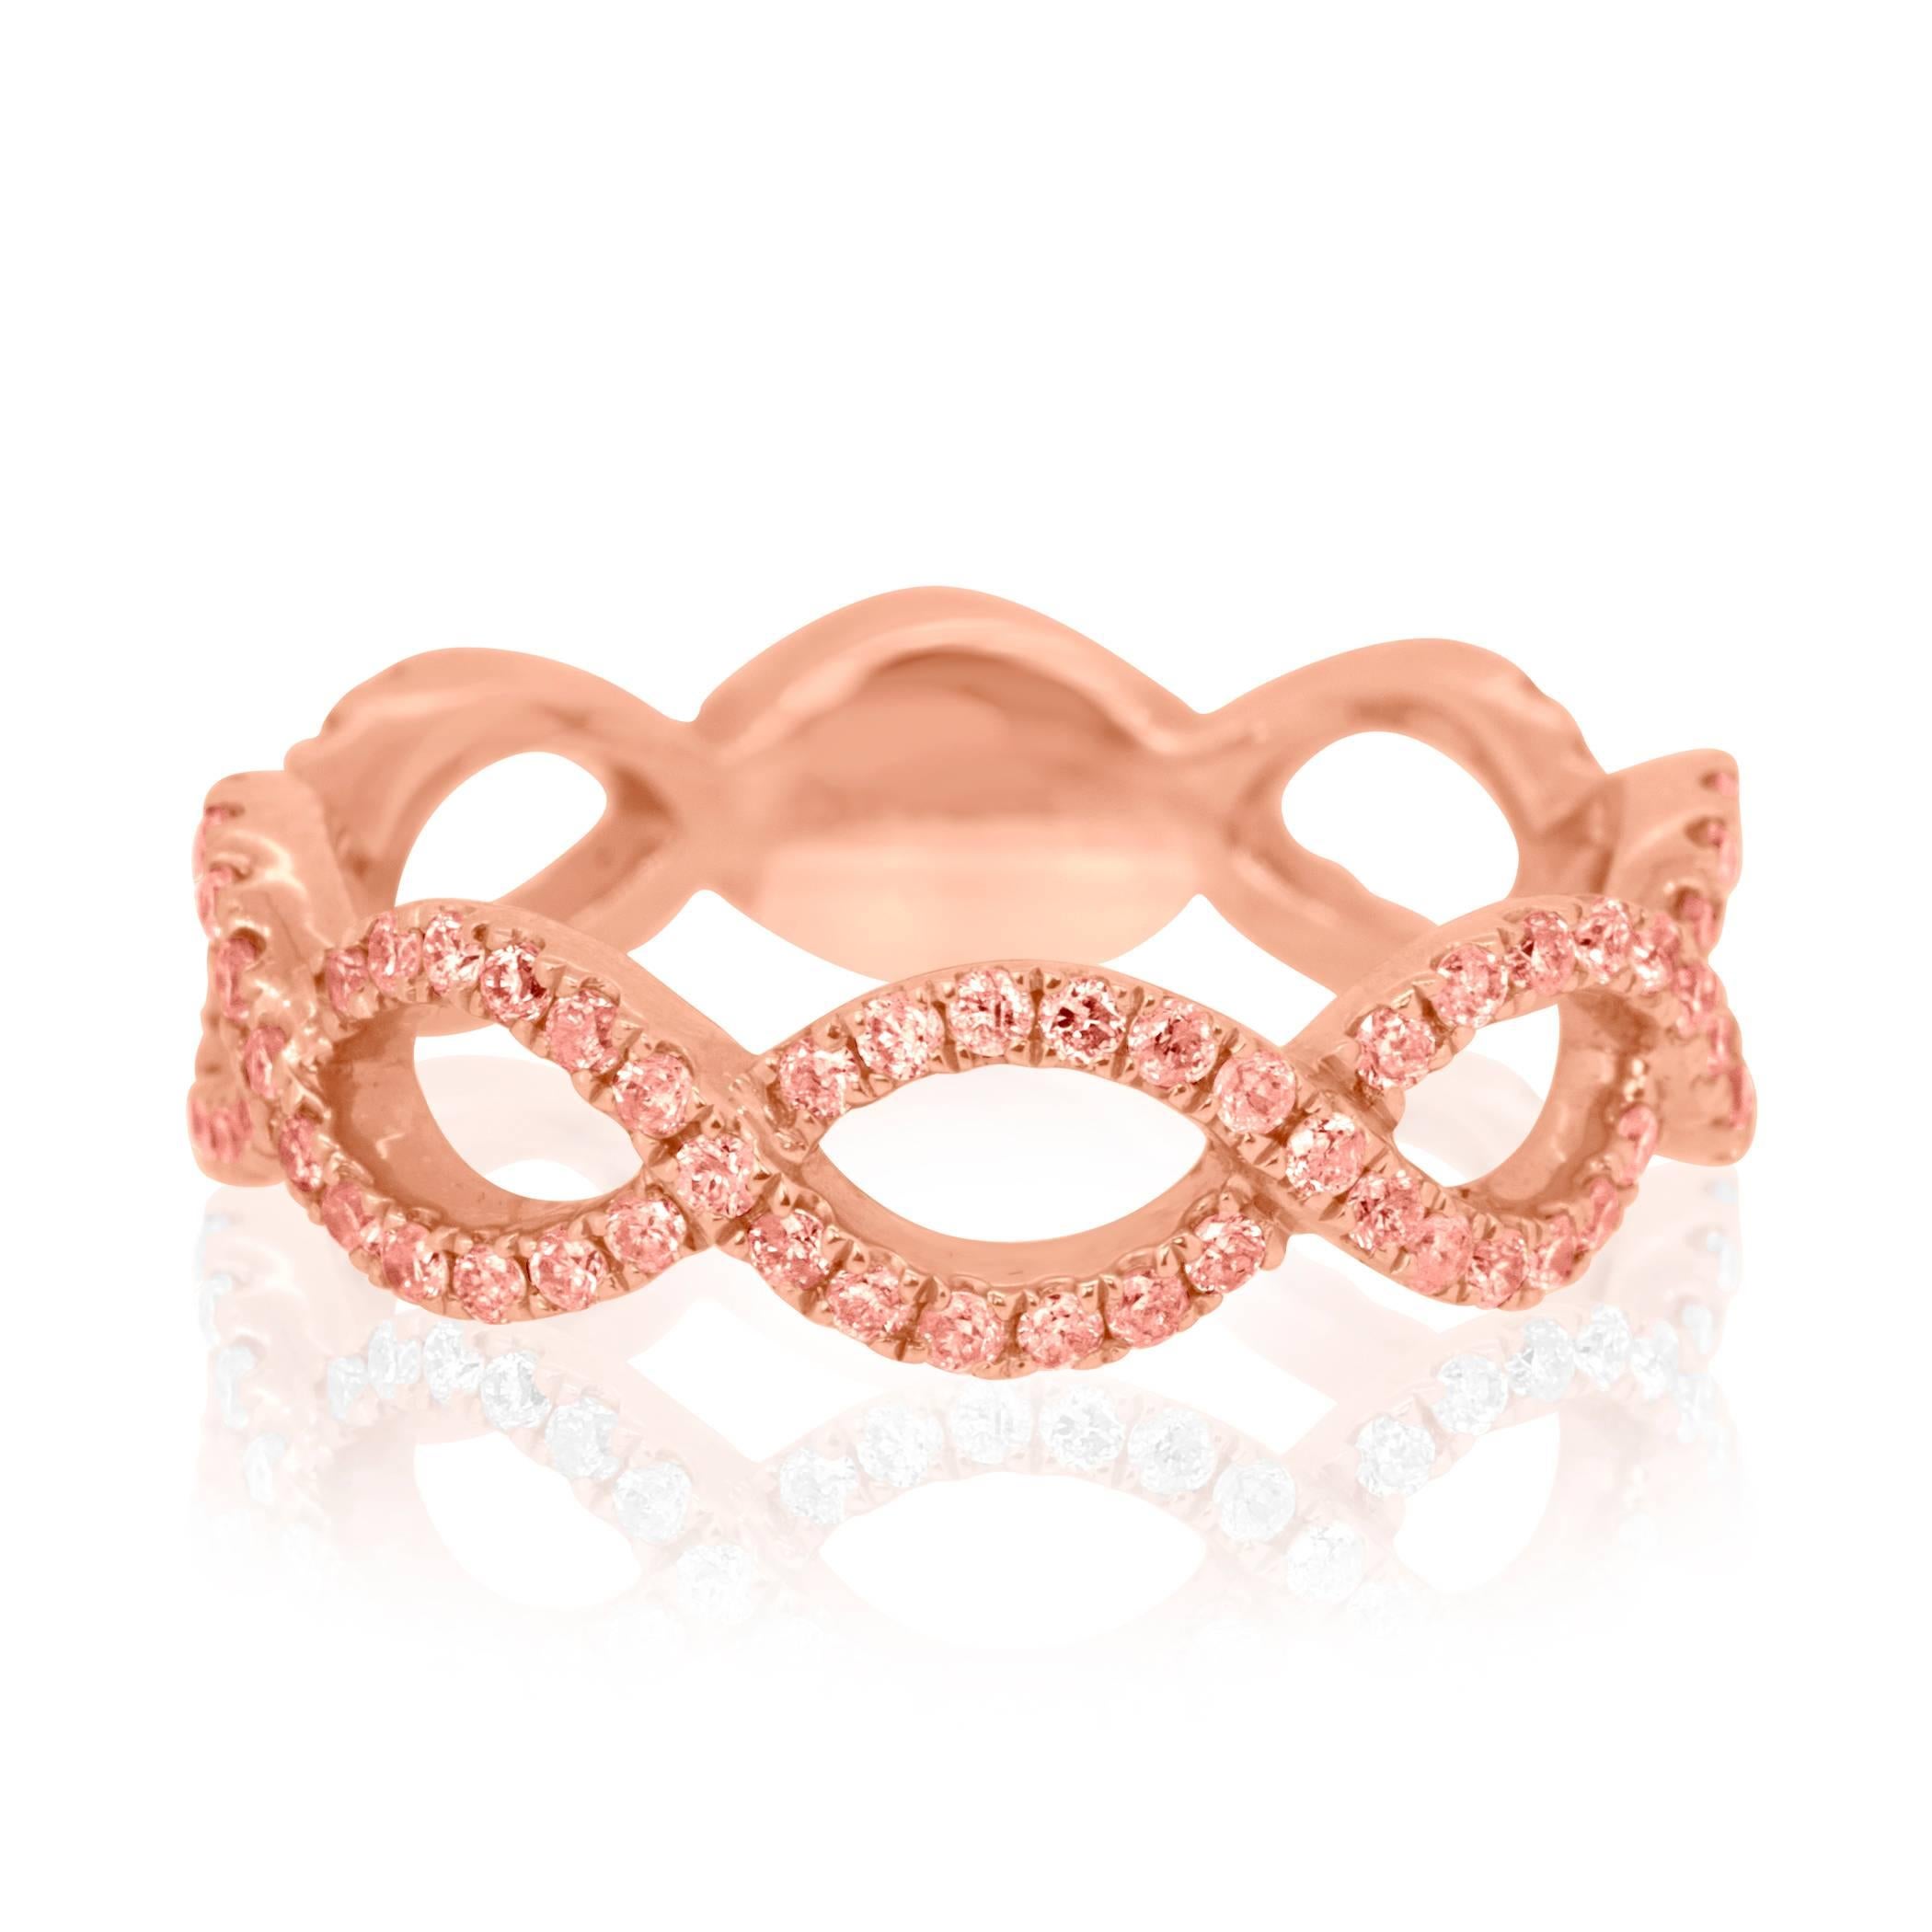 0.70 Carat Natural Pink Diamond  SI Clarity set in stunning in 14k Rose Gold Stackable Fashion Twist rope style Ring .

Available in all gold colors and and in White, Yellow, Champagne and Black Diamonds.

Style available in different price ranges